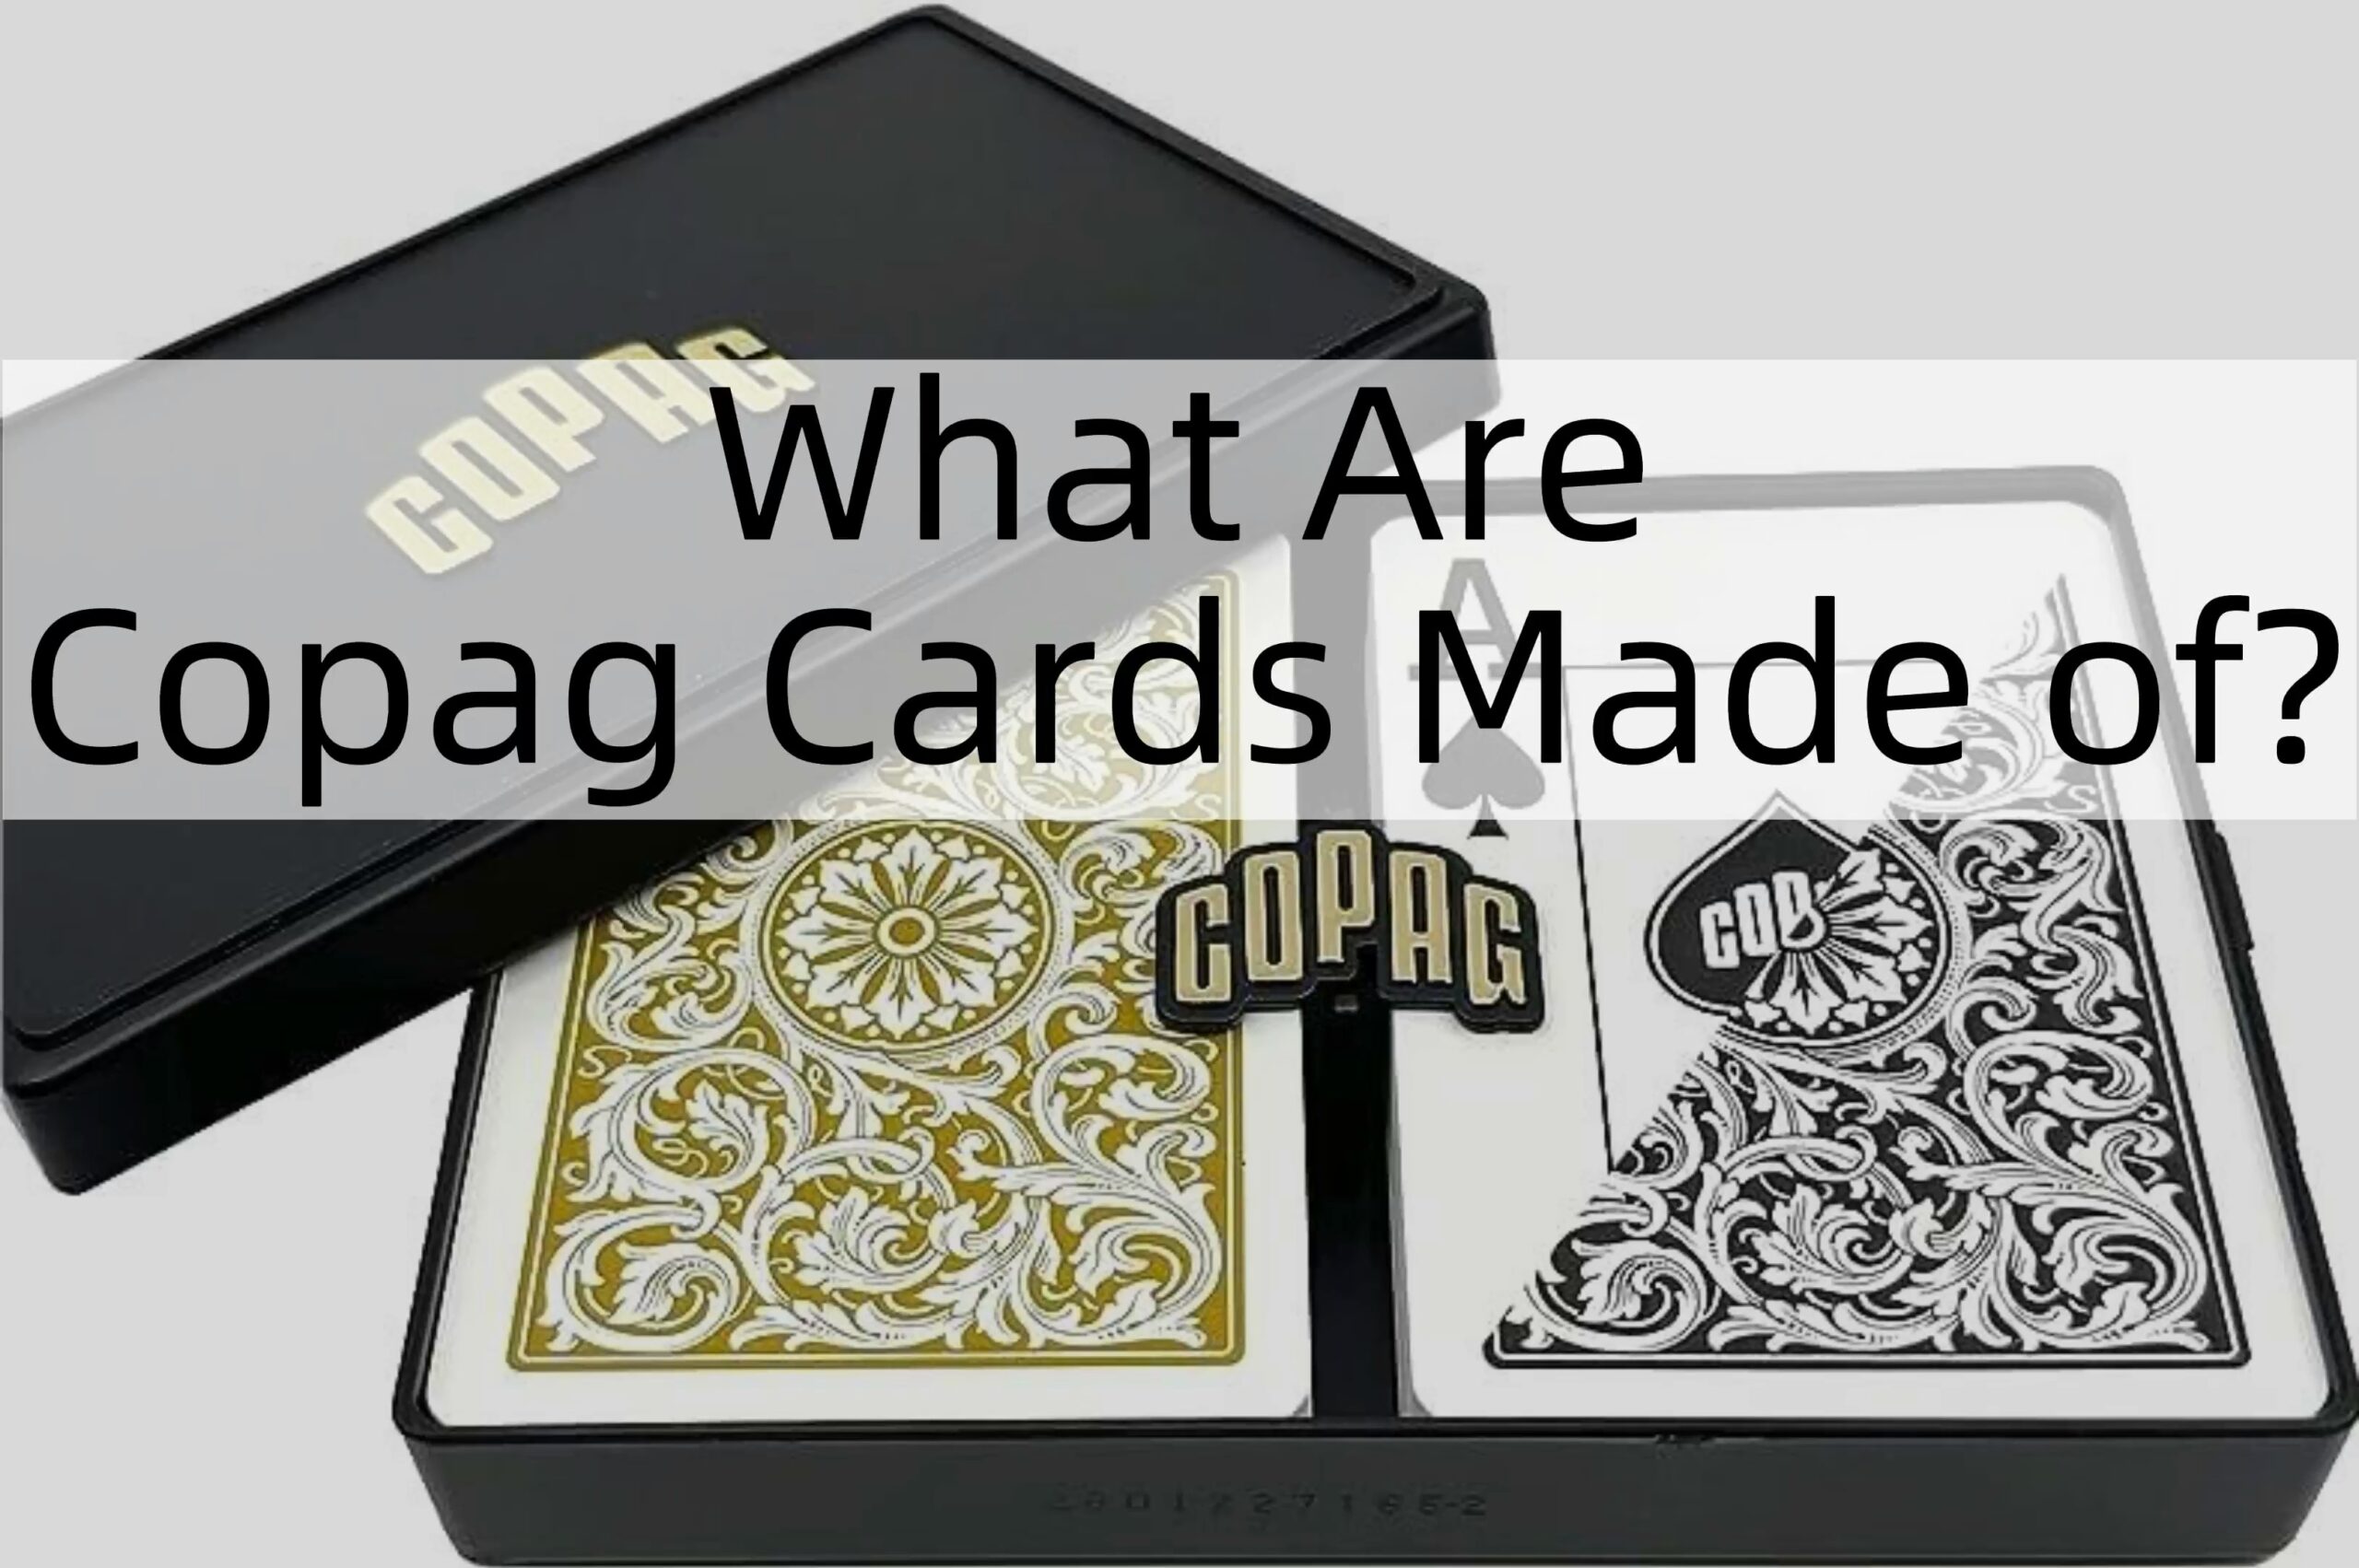 What Are Copag Cards Made of